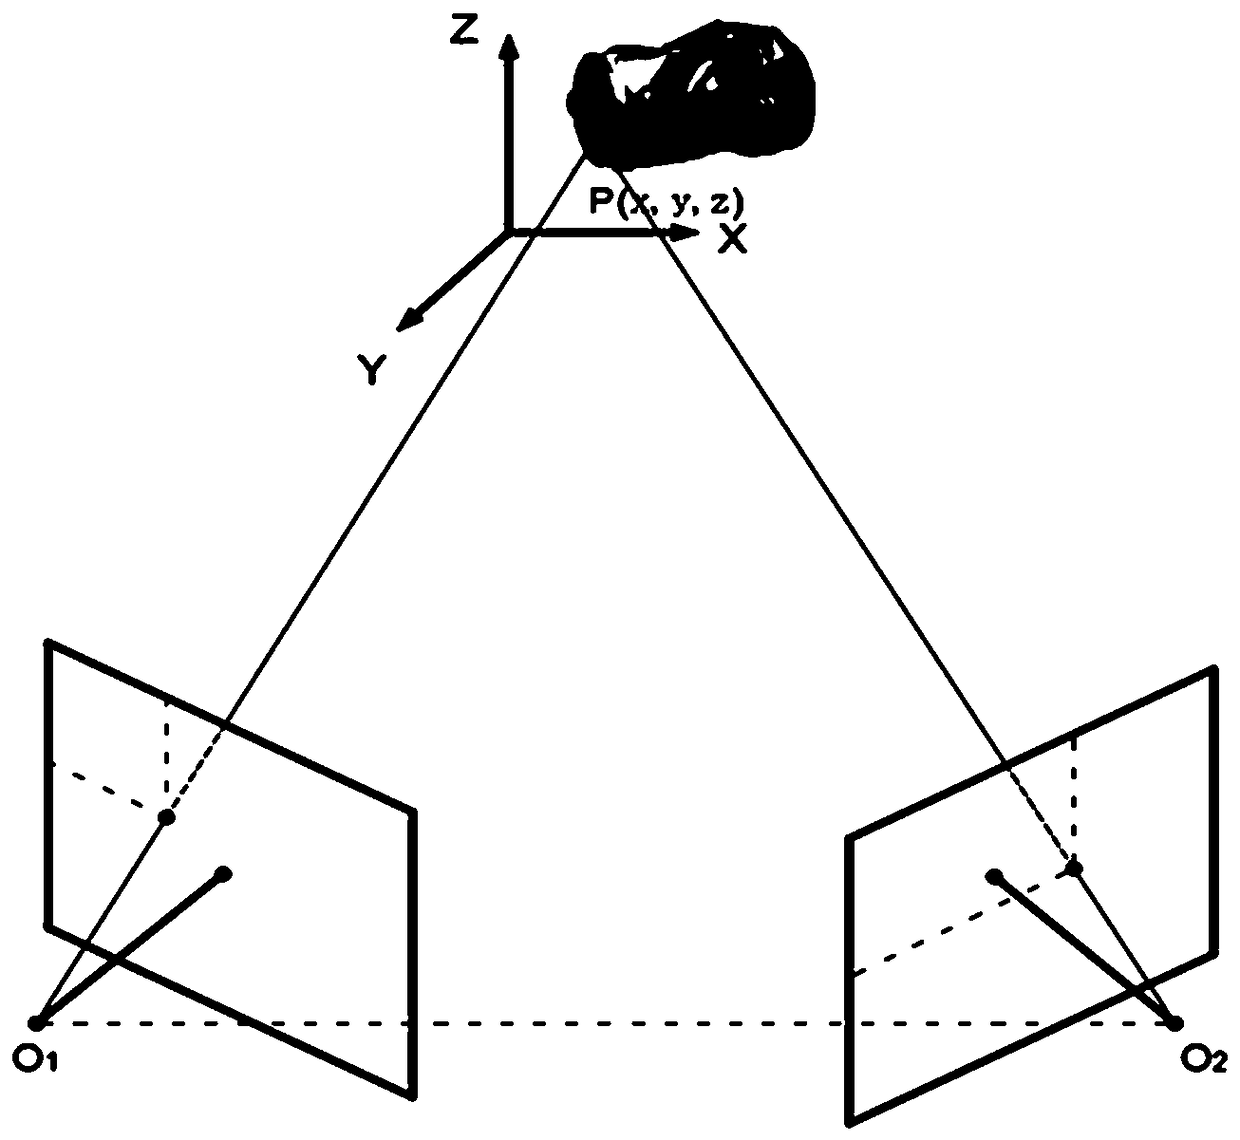 Intelligent waste classification robot based on binocular stereoscopic vision positioning and recognition